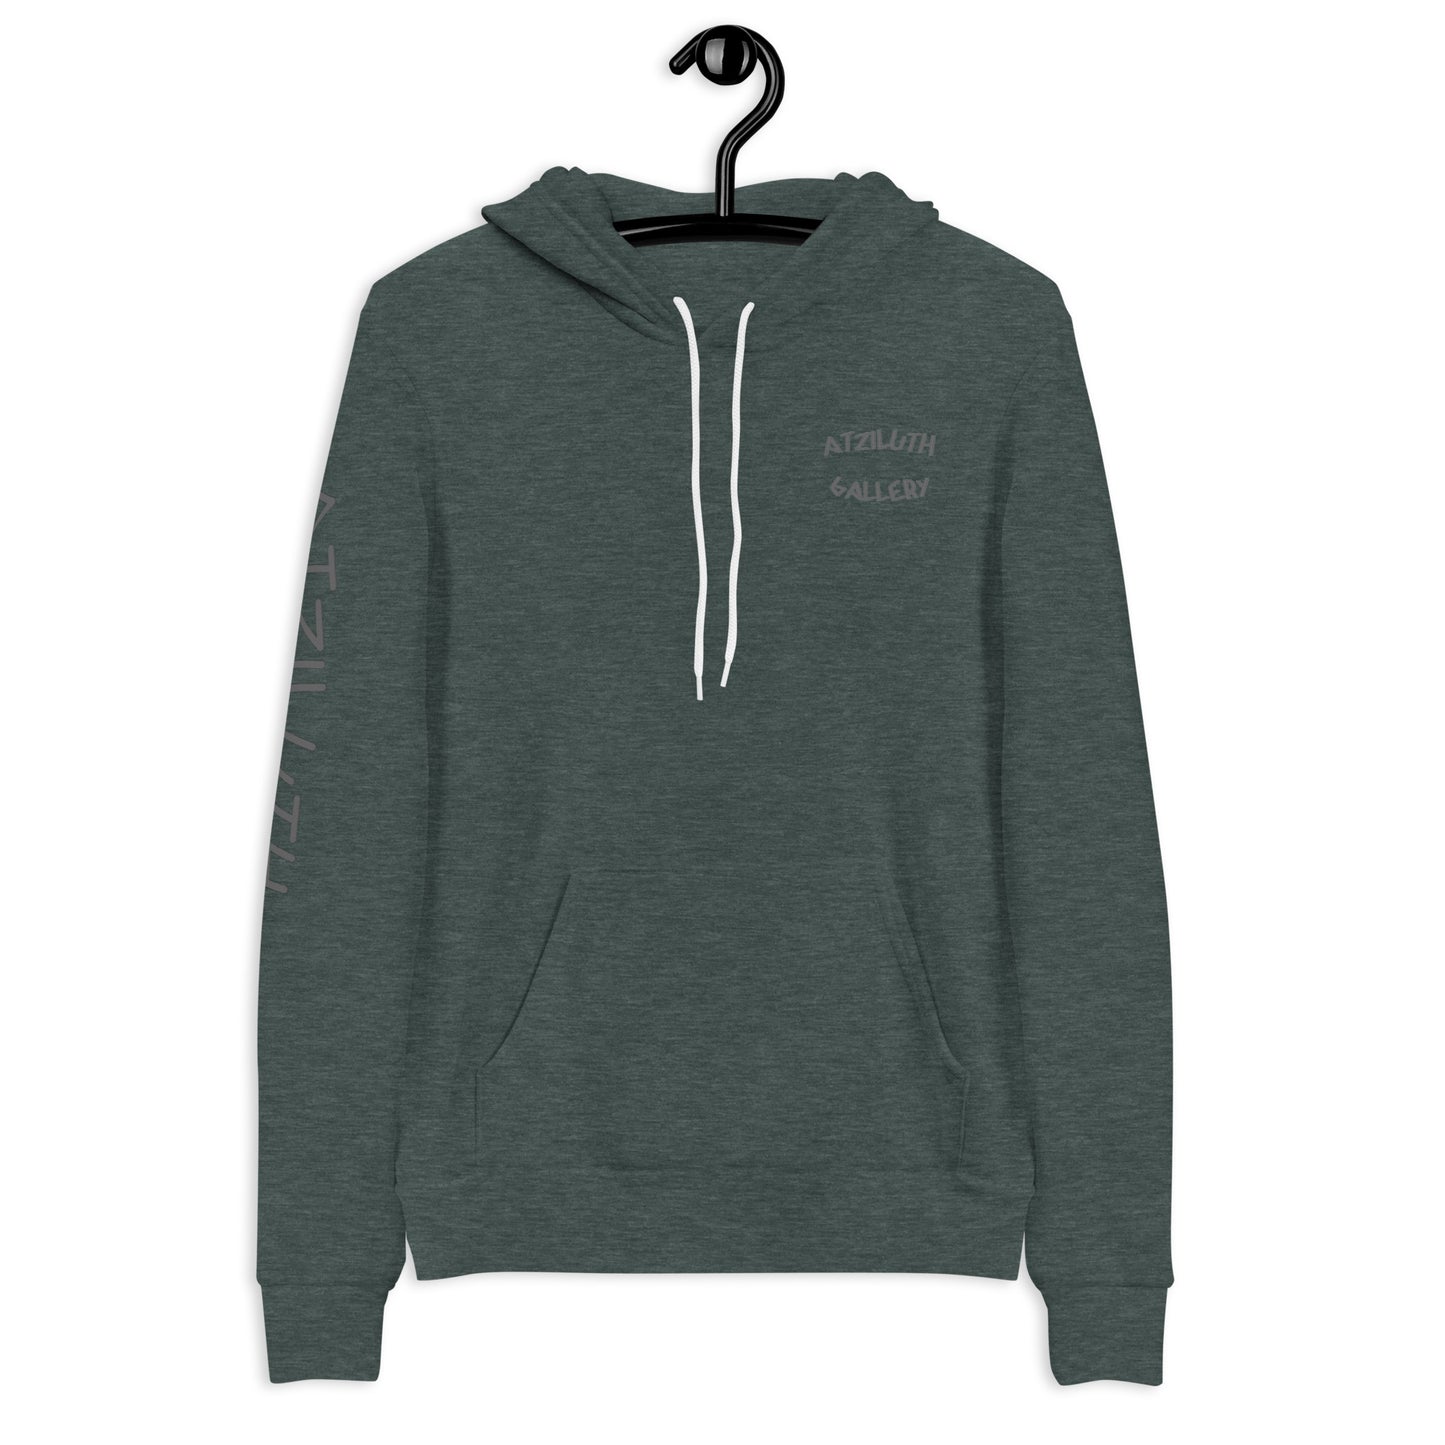 Atziluth "Forever" hoodie